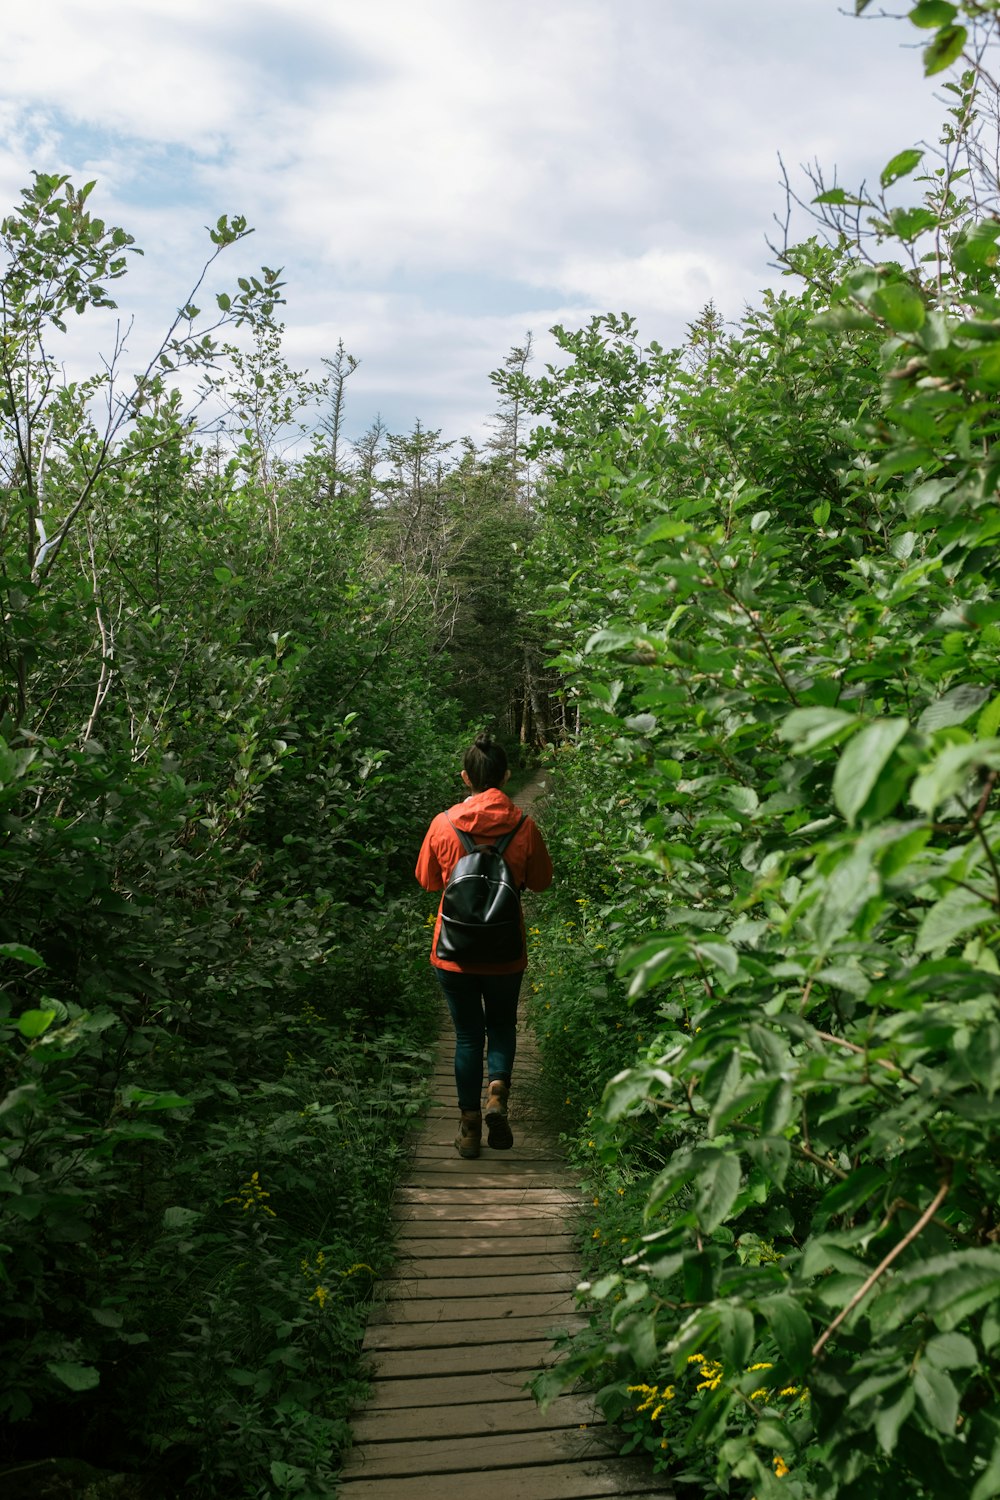 a person with a backpack walking down a wooden path